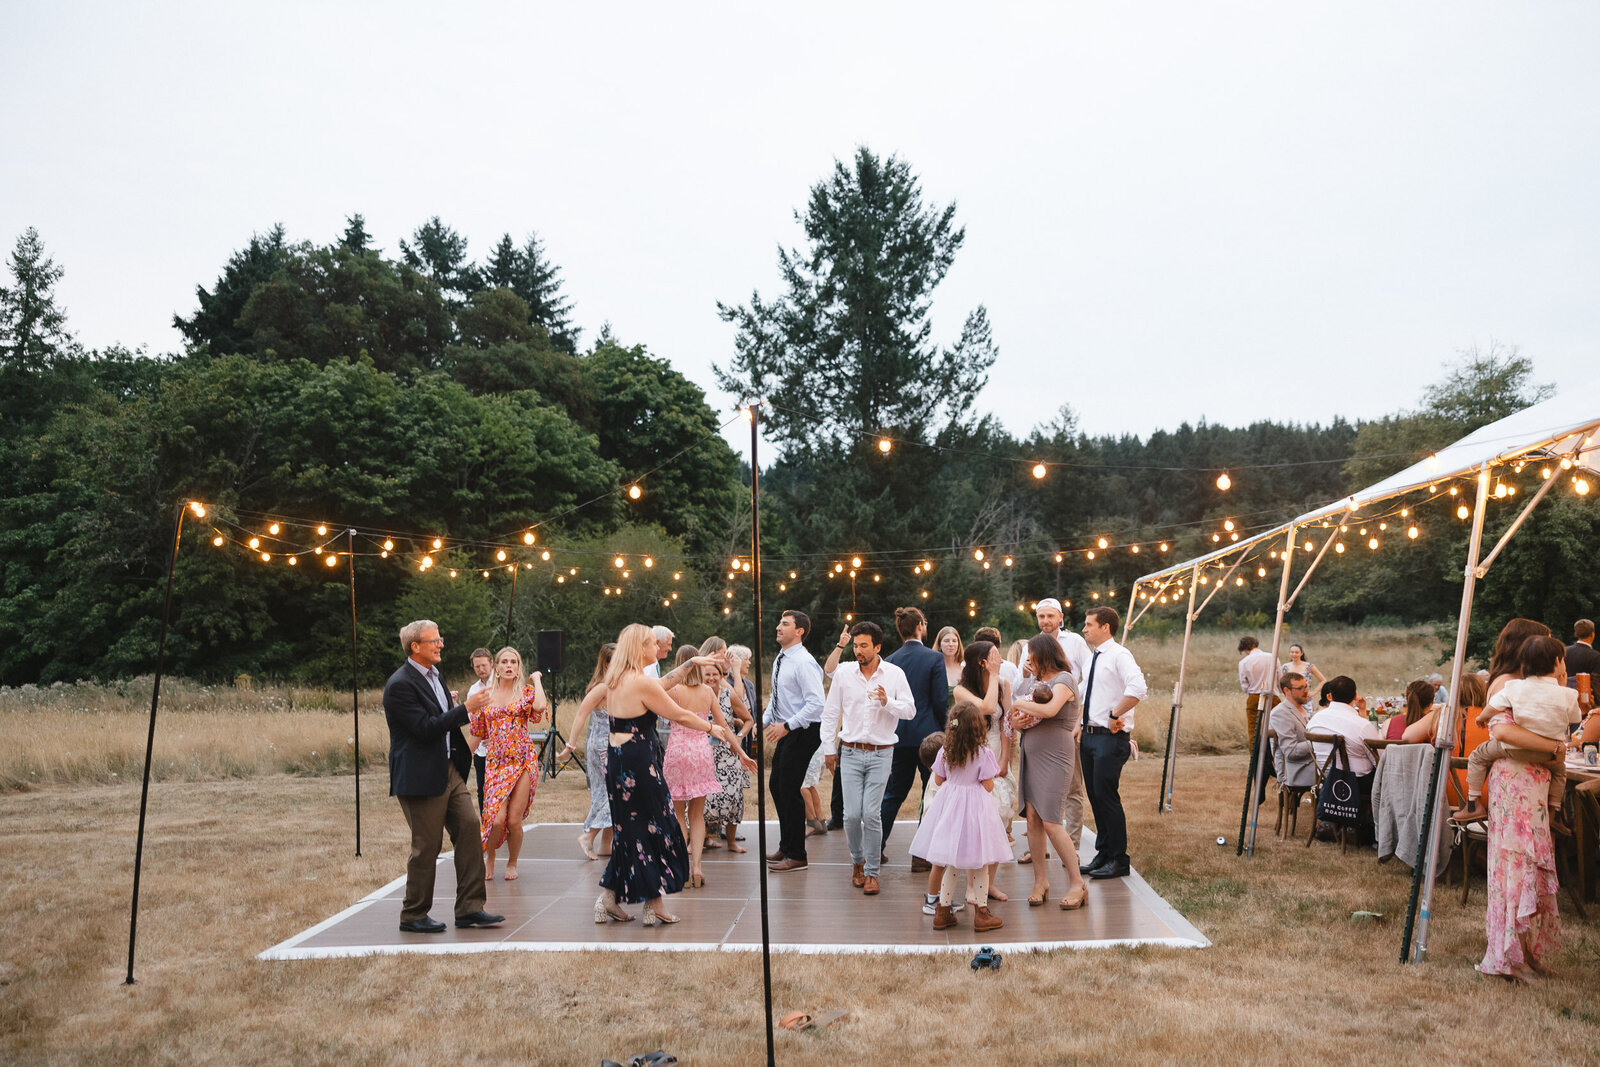 Wedding guests dancing on an outdoor dance floor with cafe string lights.